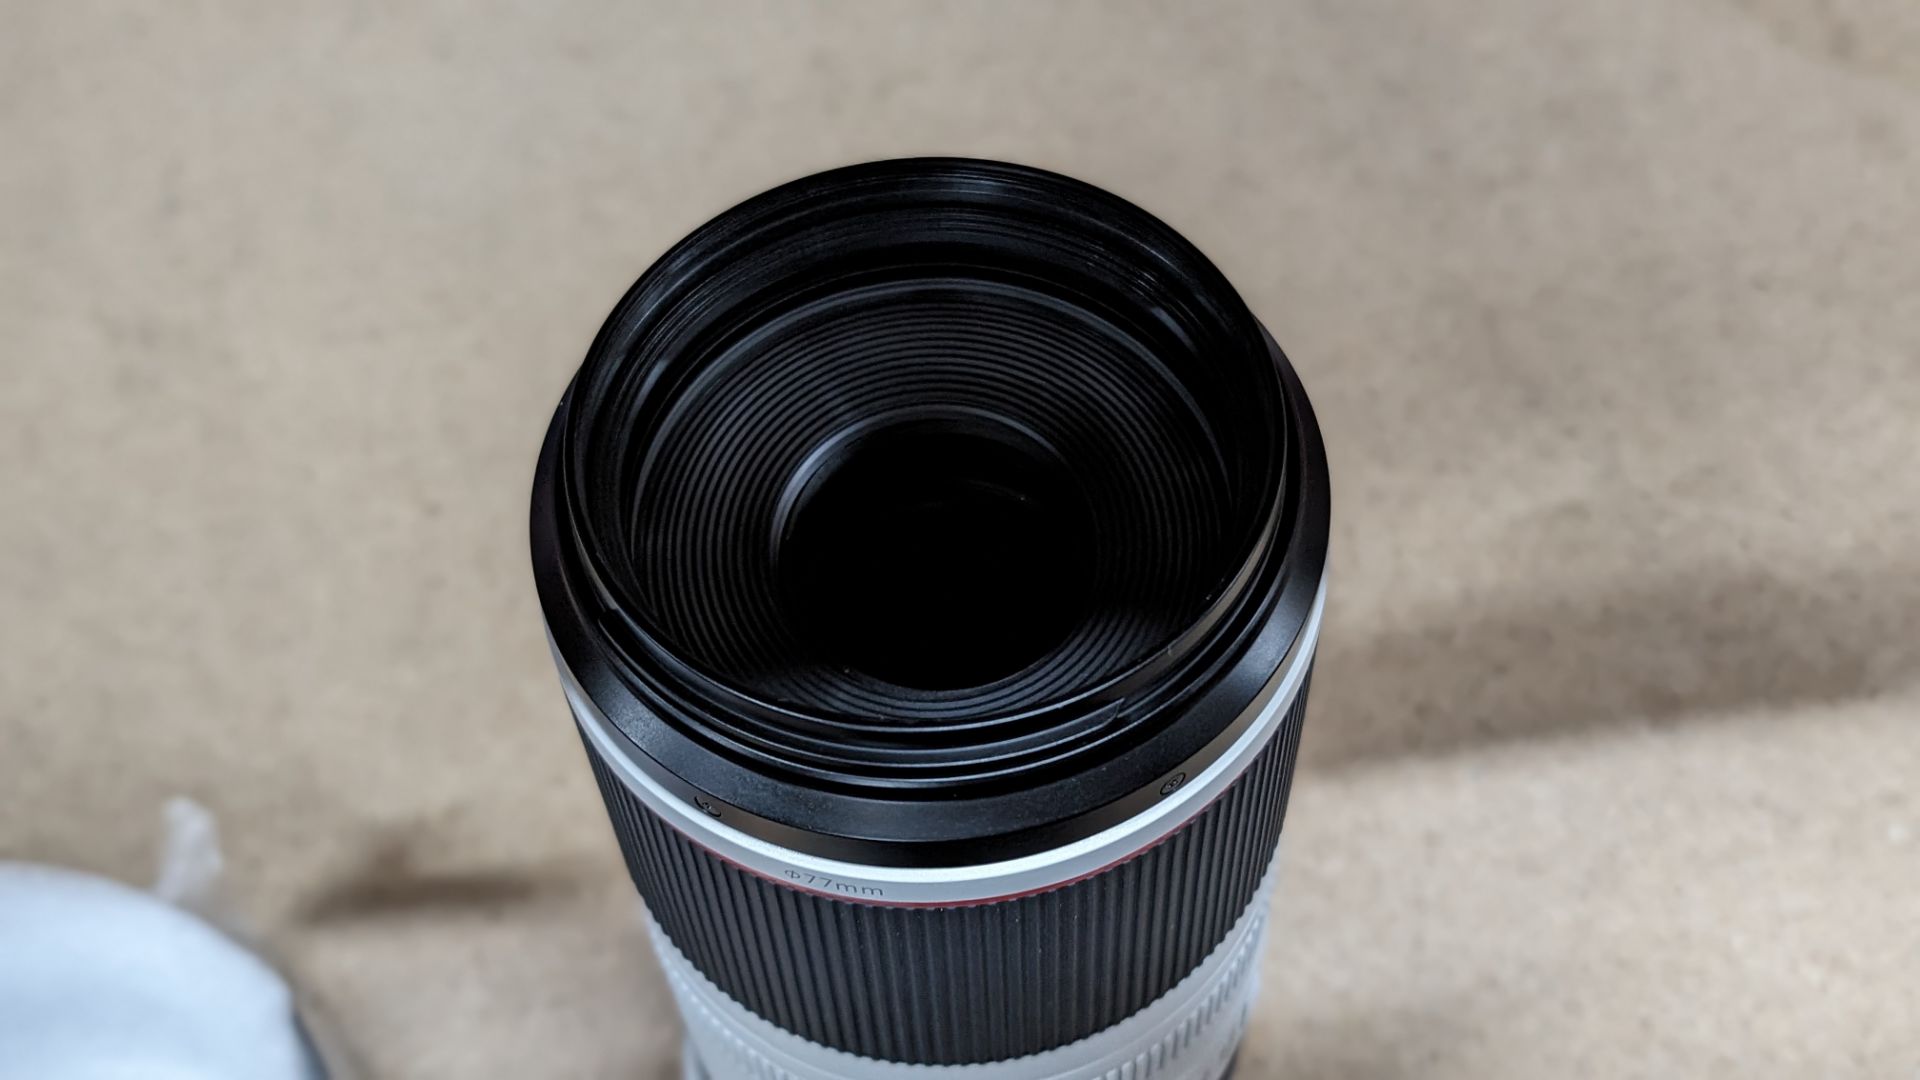 Canon RF 100-500mm lens, f4.5/7.1 L IS USM, including soft carry case and strap - Image 23 of 28